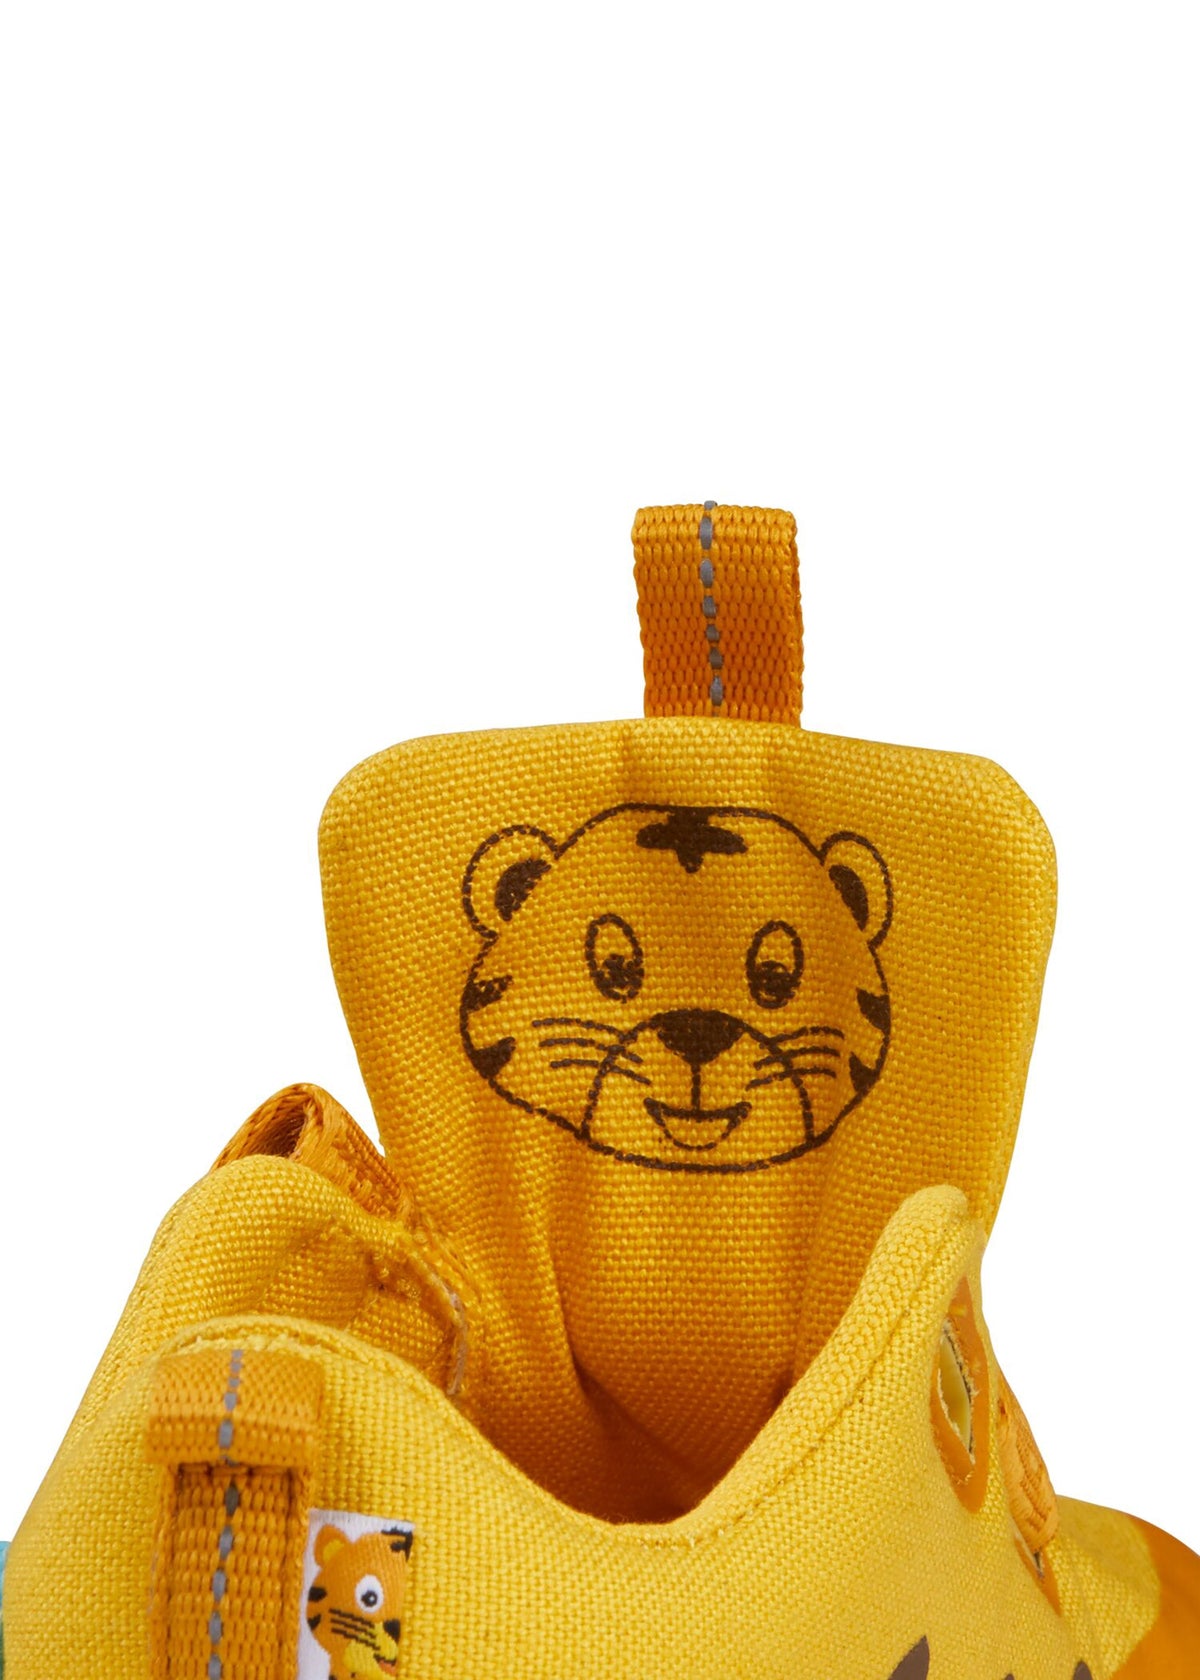 Children's barefoot sneakers - Cotton Lucky, Tiger